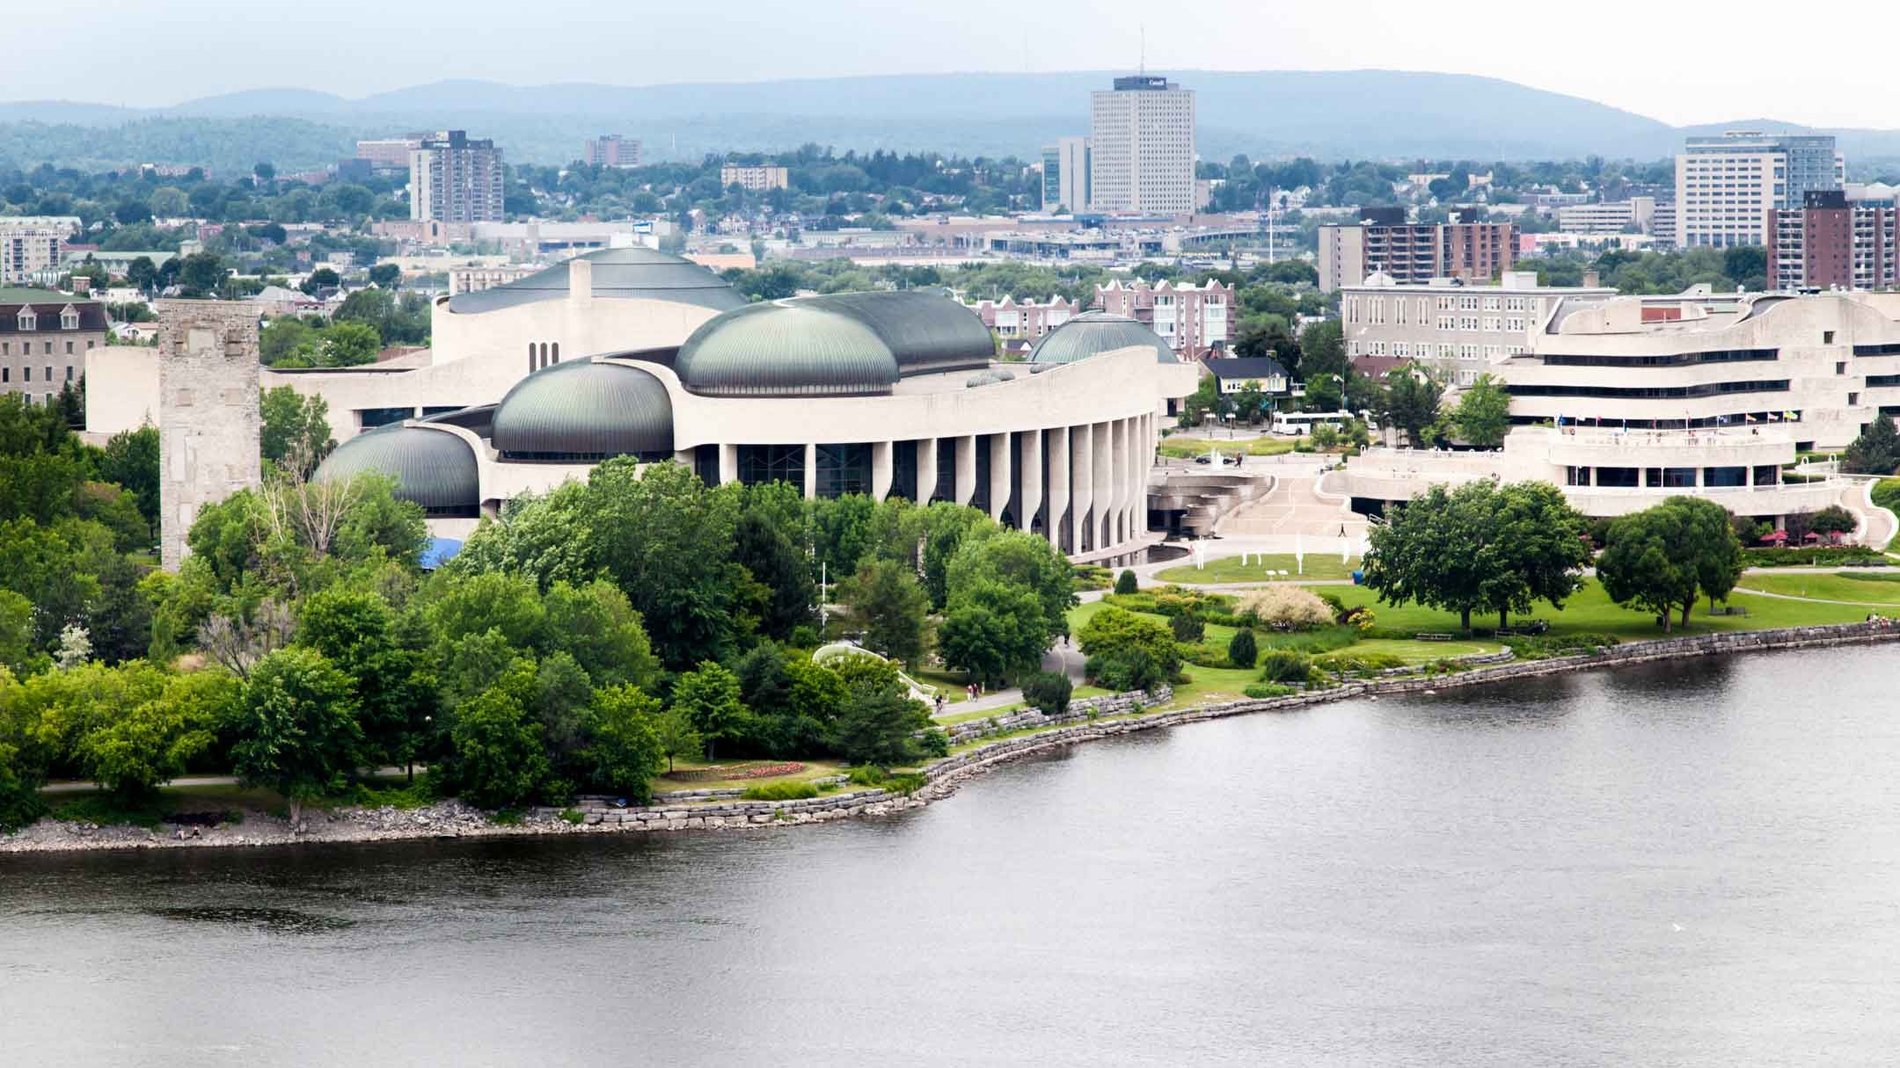 Museum Of History in Gatineau, along the water front